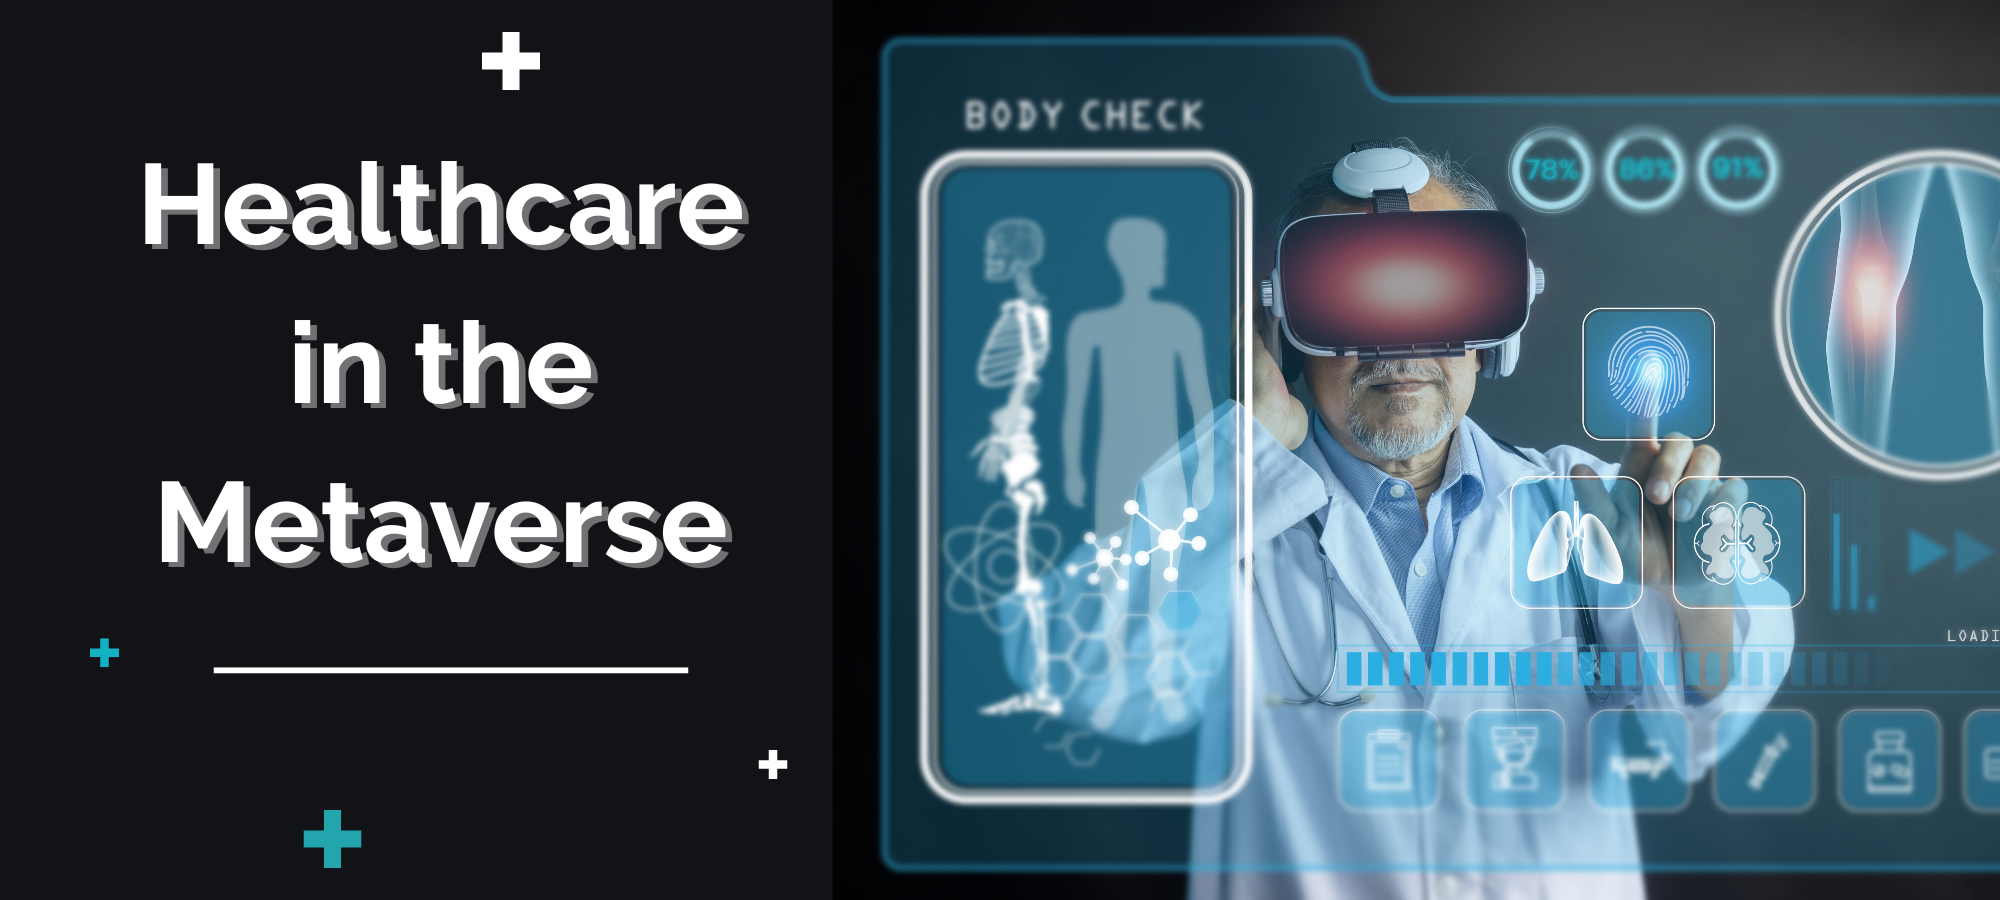 Healthcare in the Metaverse: How to Get Started